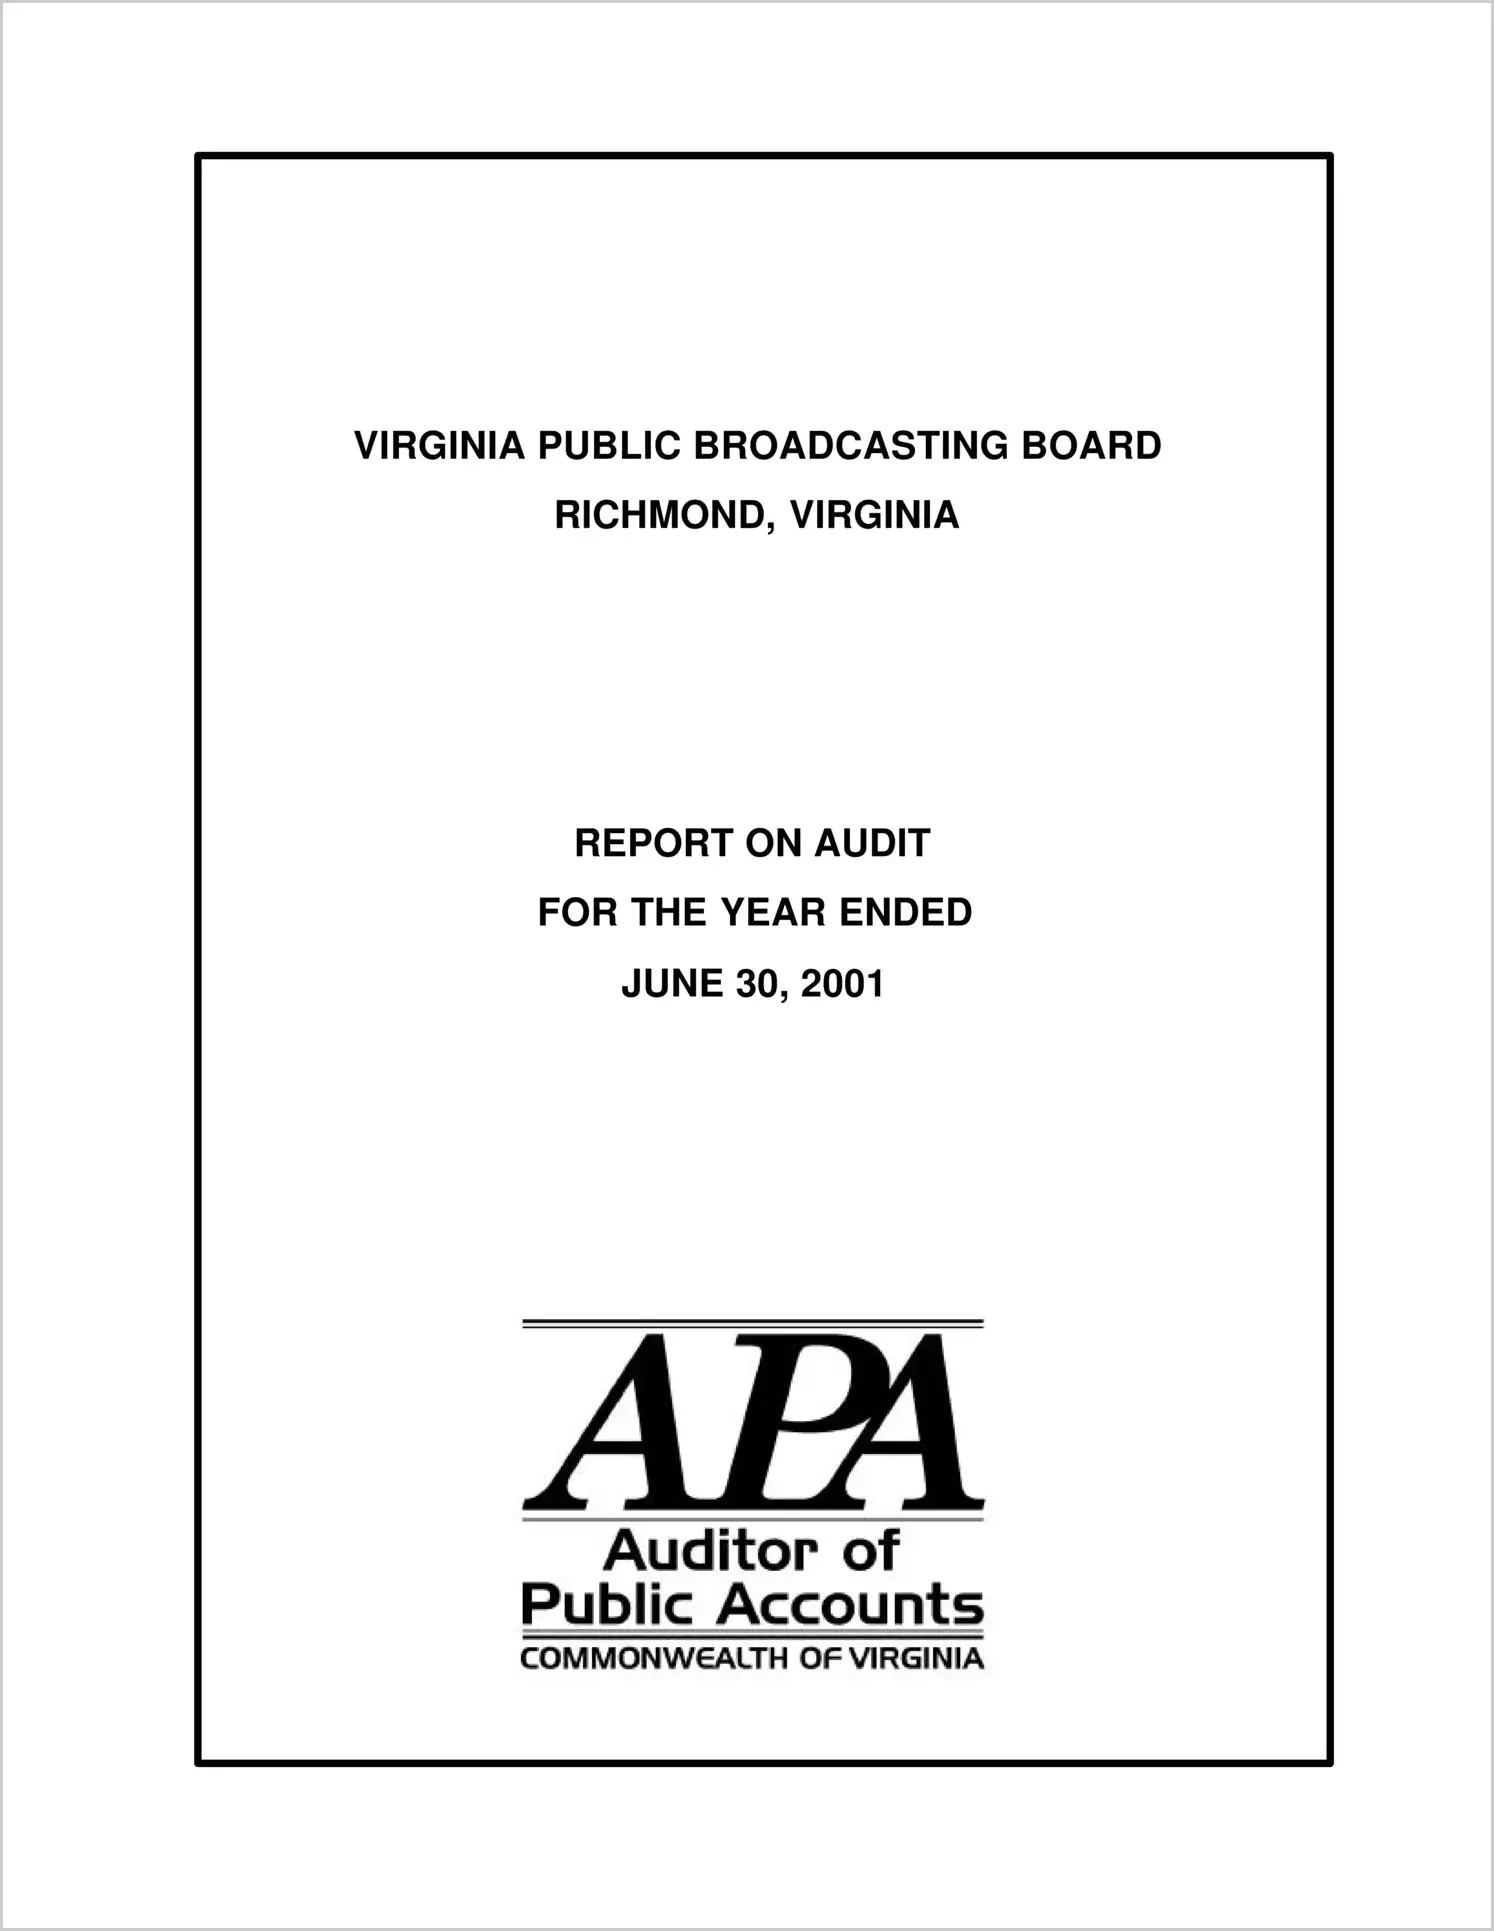 Virginia Public Broadcasting Board for the year ended June 30, 2001